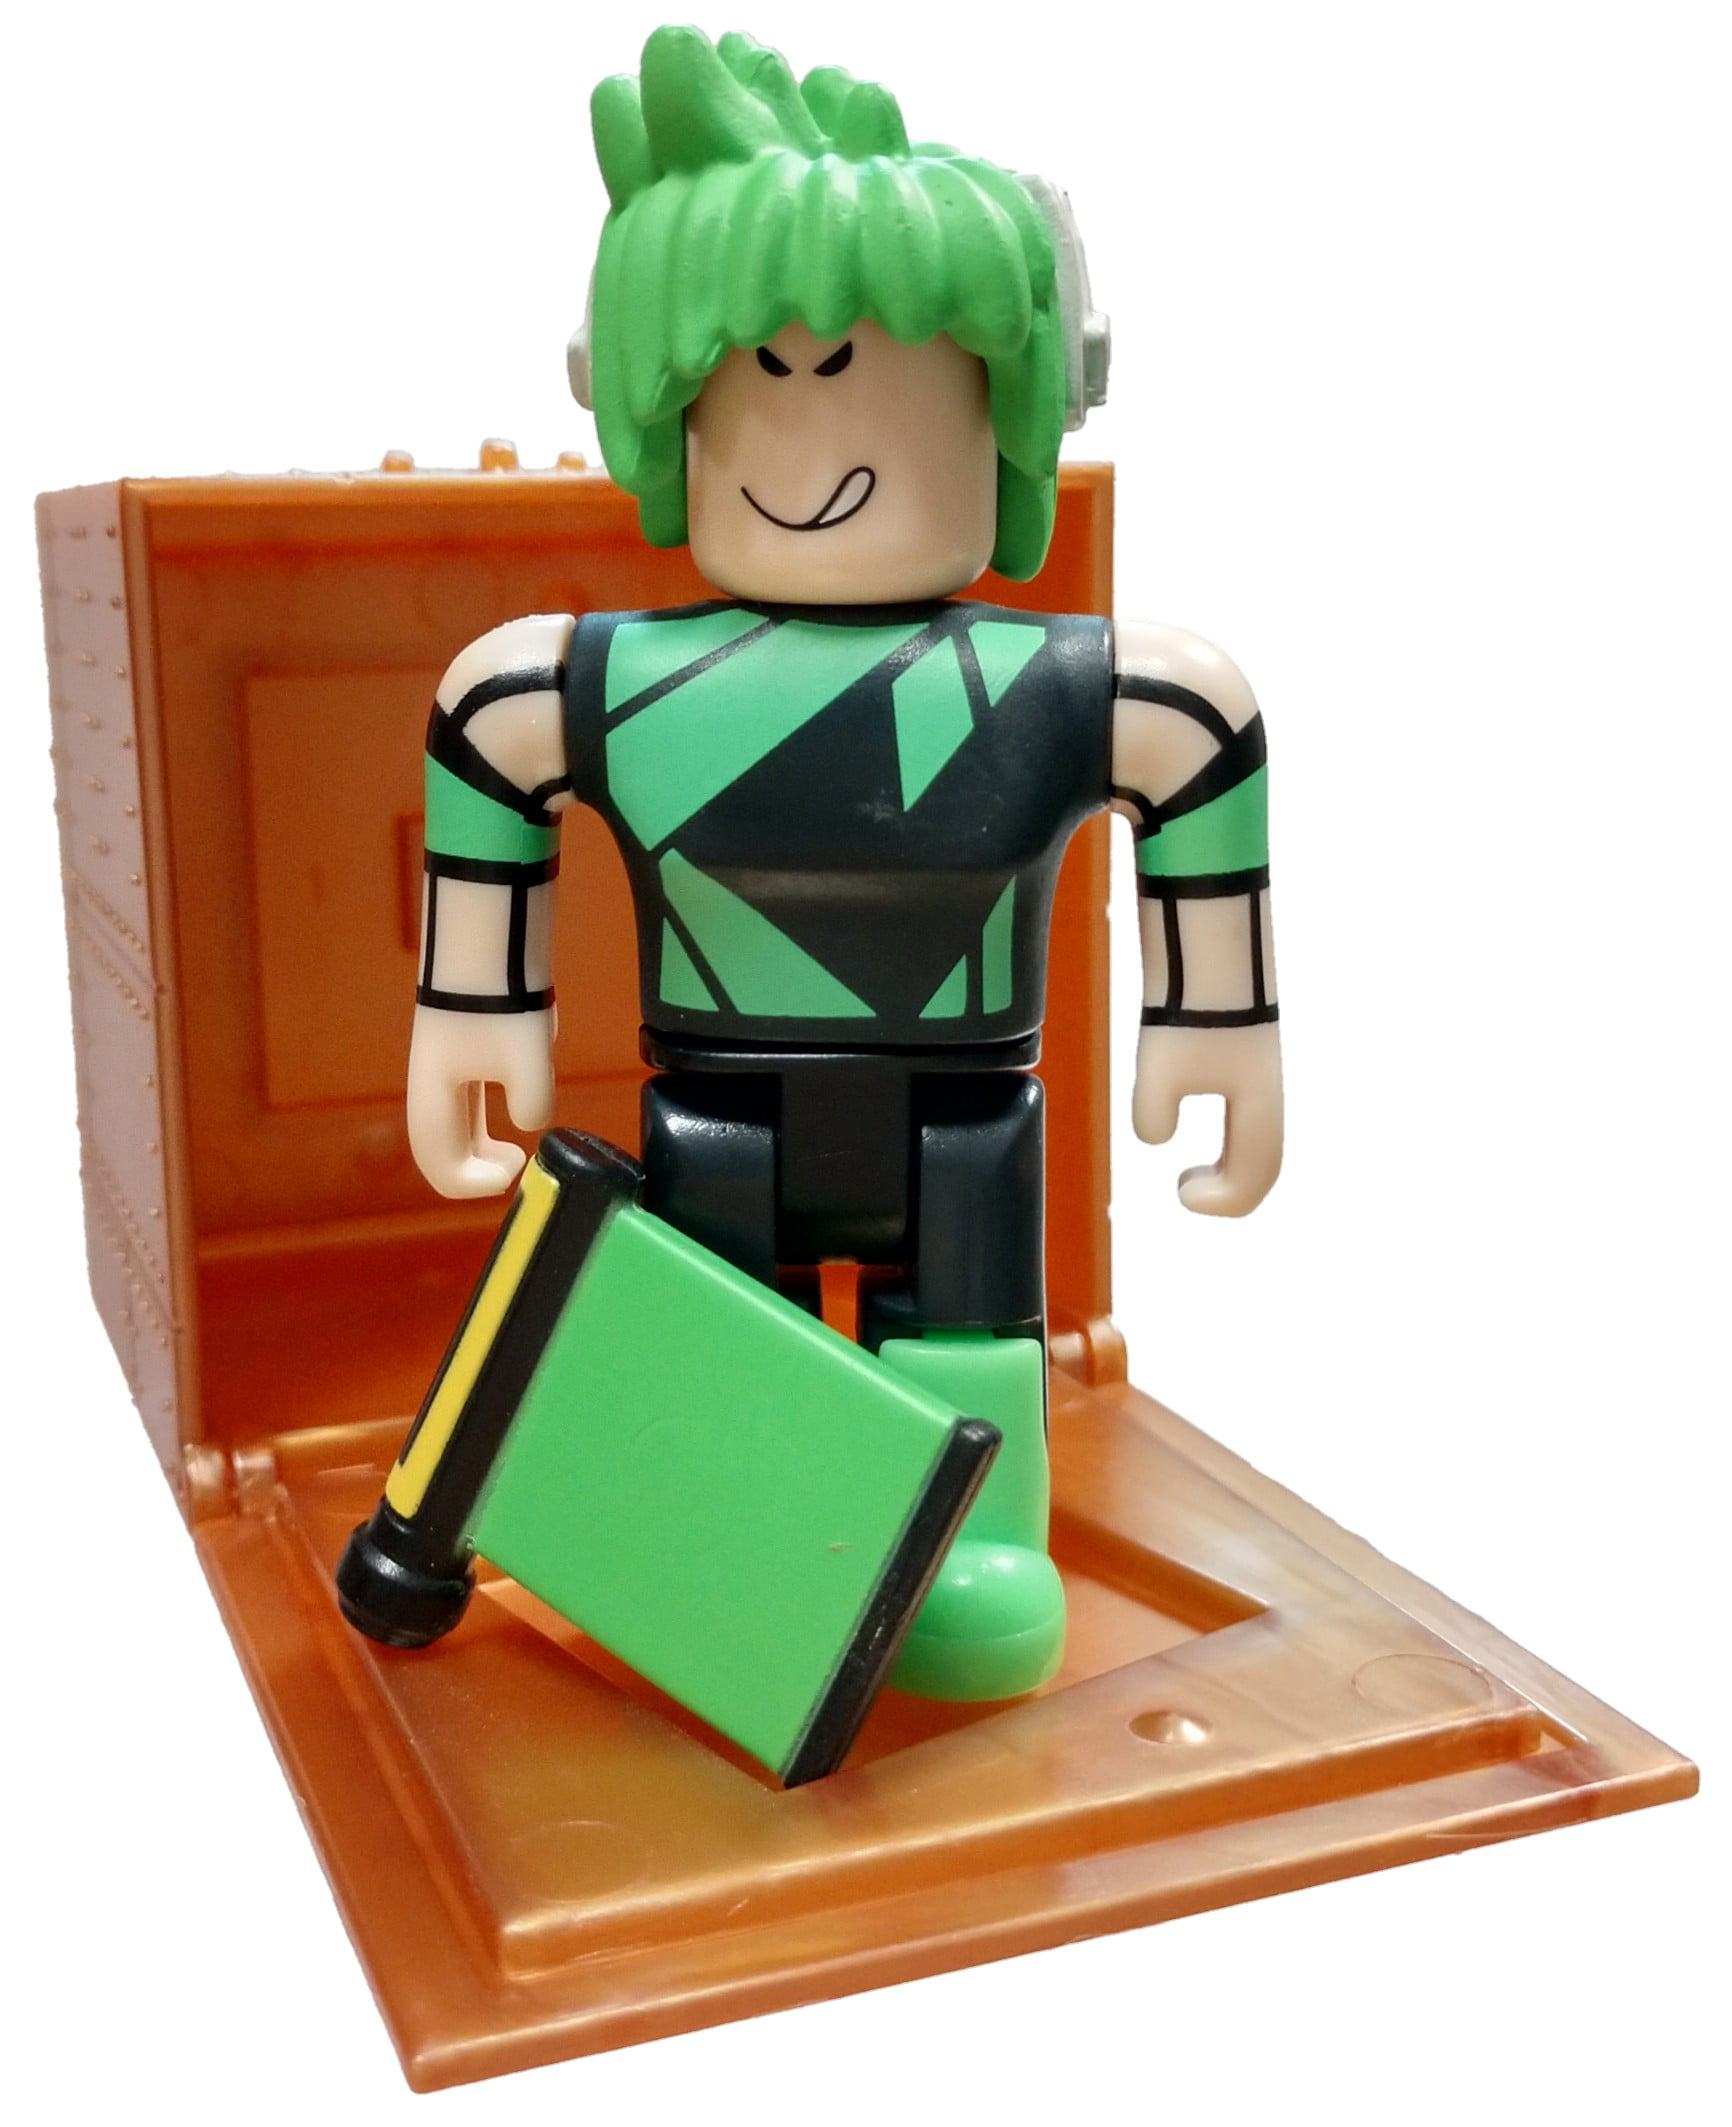 Roblox Series 8 Texting Simulator Future Tech Boy Mini Figure With Cube And Online Code No Packaging Walmart Com Walmart Com - boy try codes for roblox